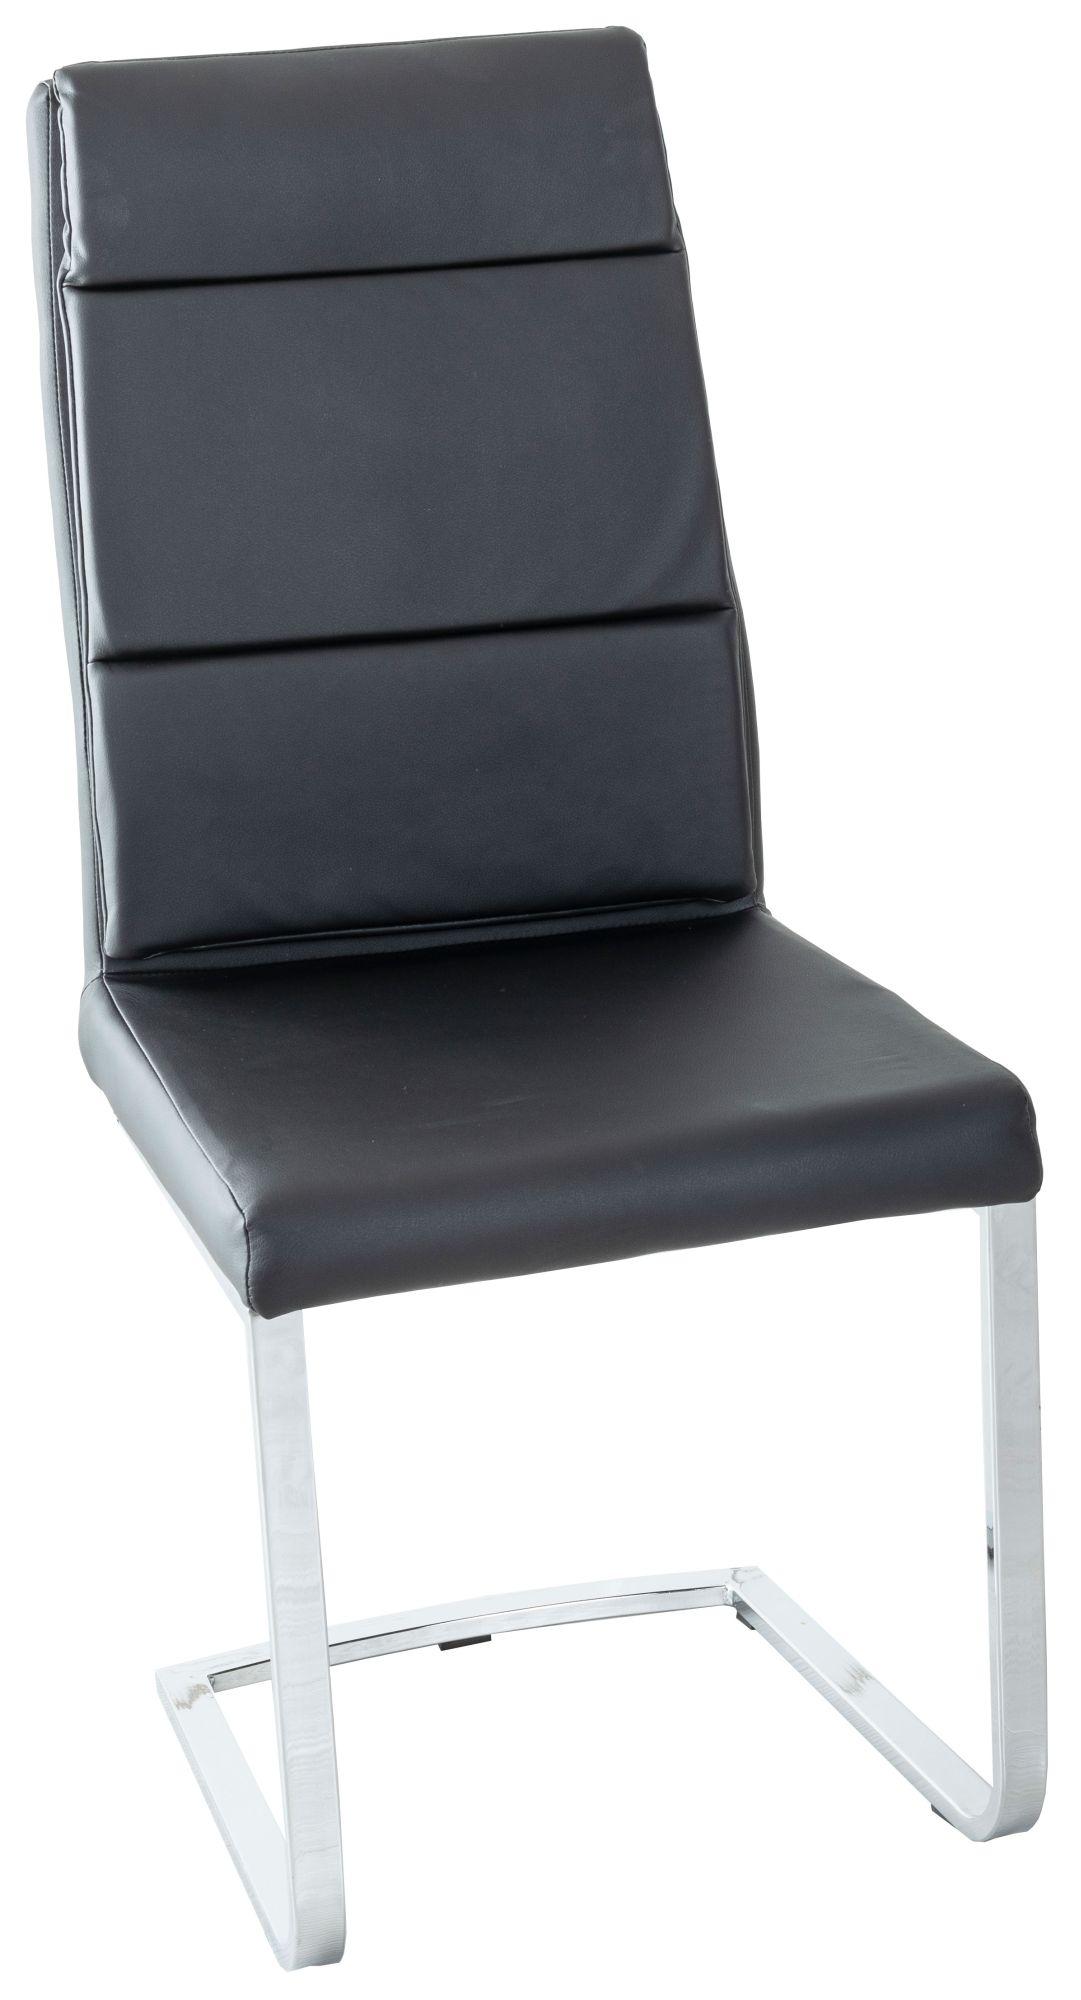 Arabella Black Dining Chair, Leather - Faux PU with Stainless Steel Chrome Cantiliver Base